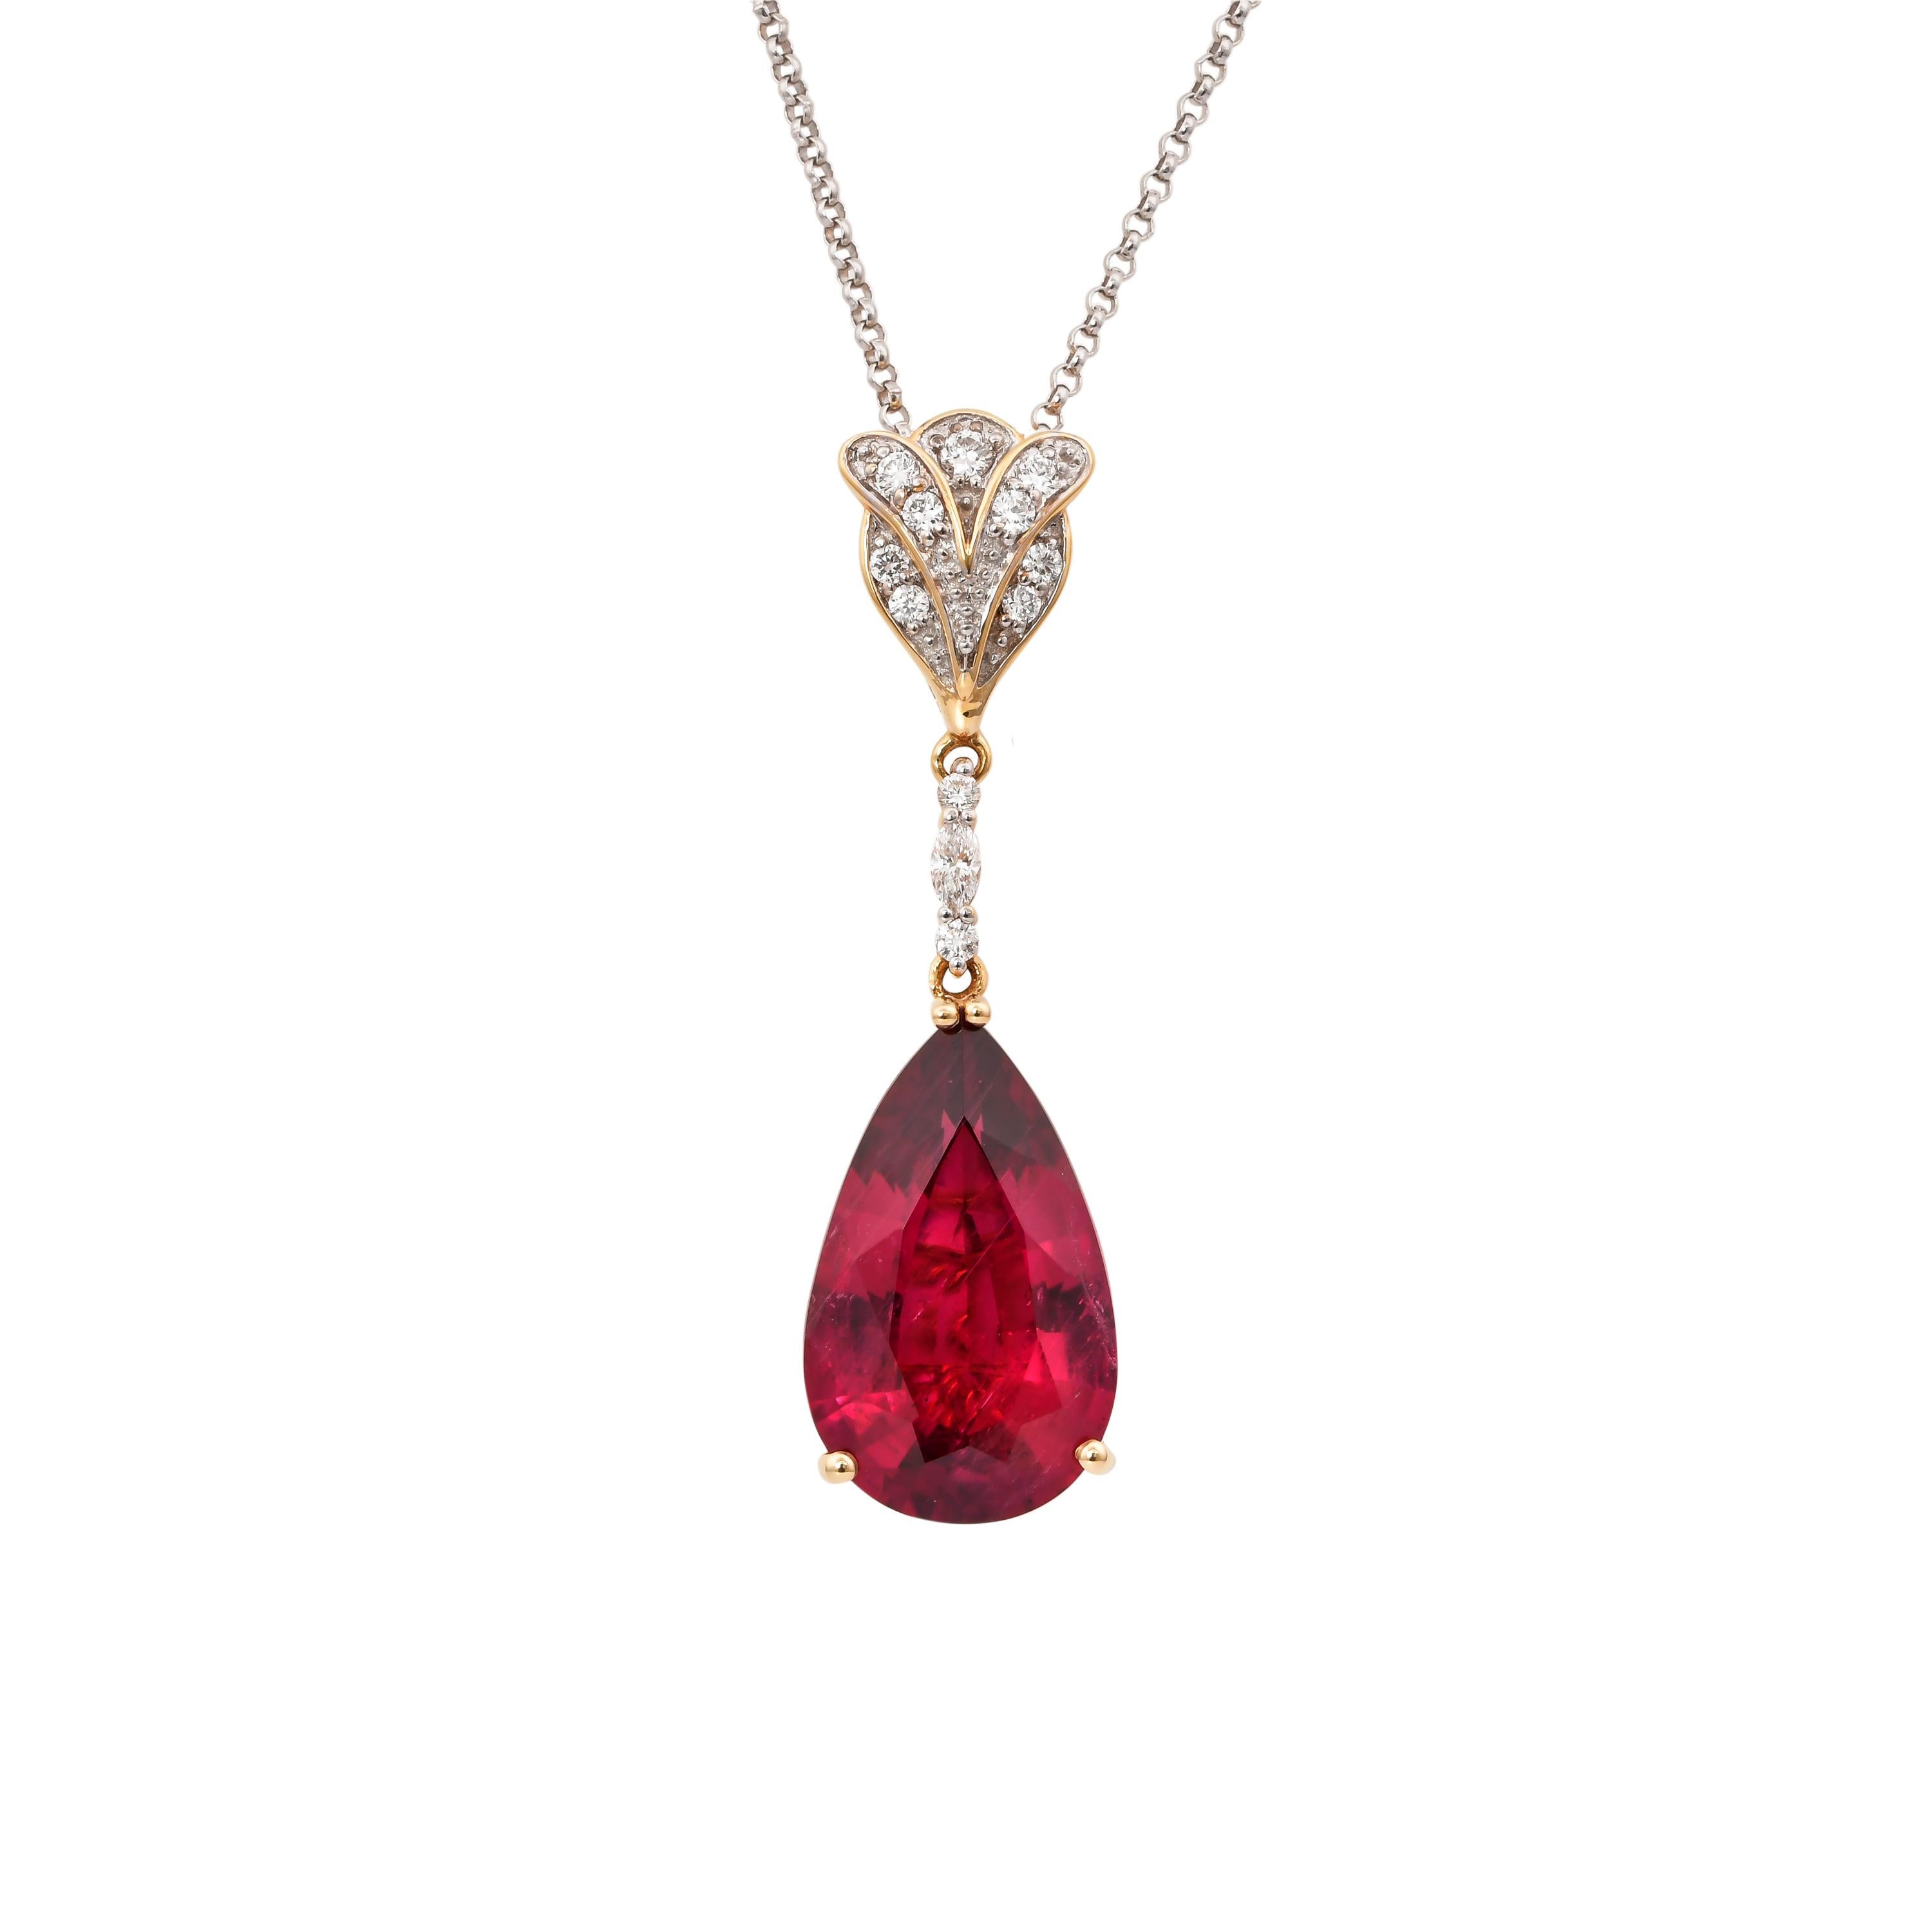 This collection features the most radiant Rubellite tourmalines. These gemstones show a magnificent and regal deep red Colour, and the yellow gold and diamond accents makes these pieces a true showstopper. 

Classic Rubellite tourmaline pendant in